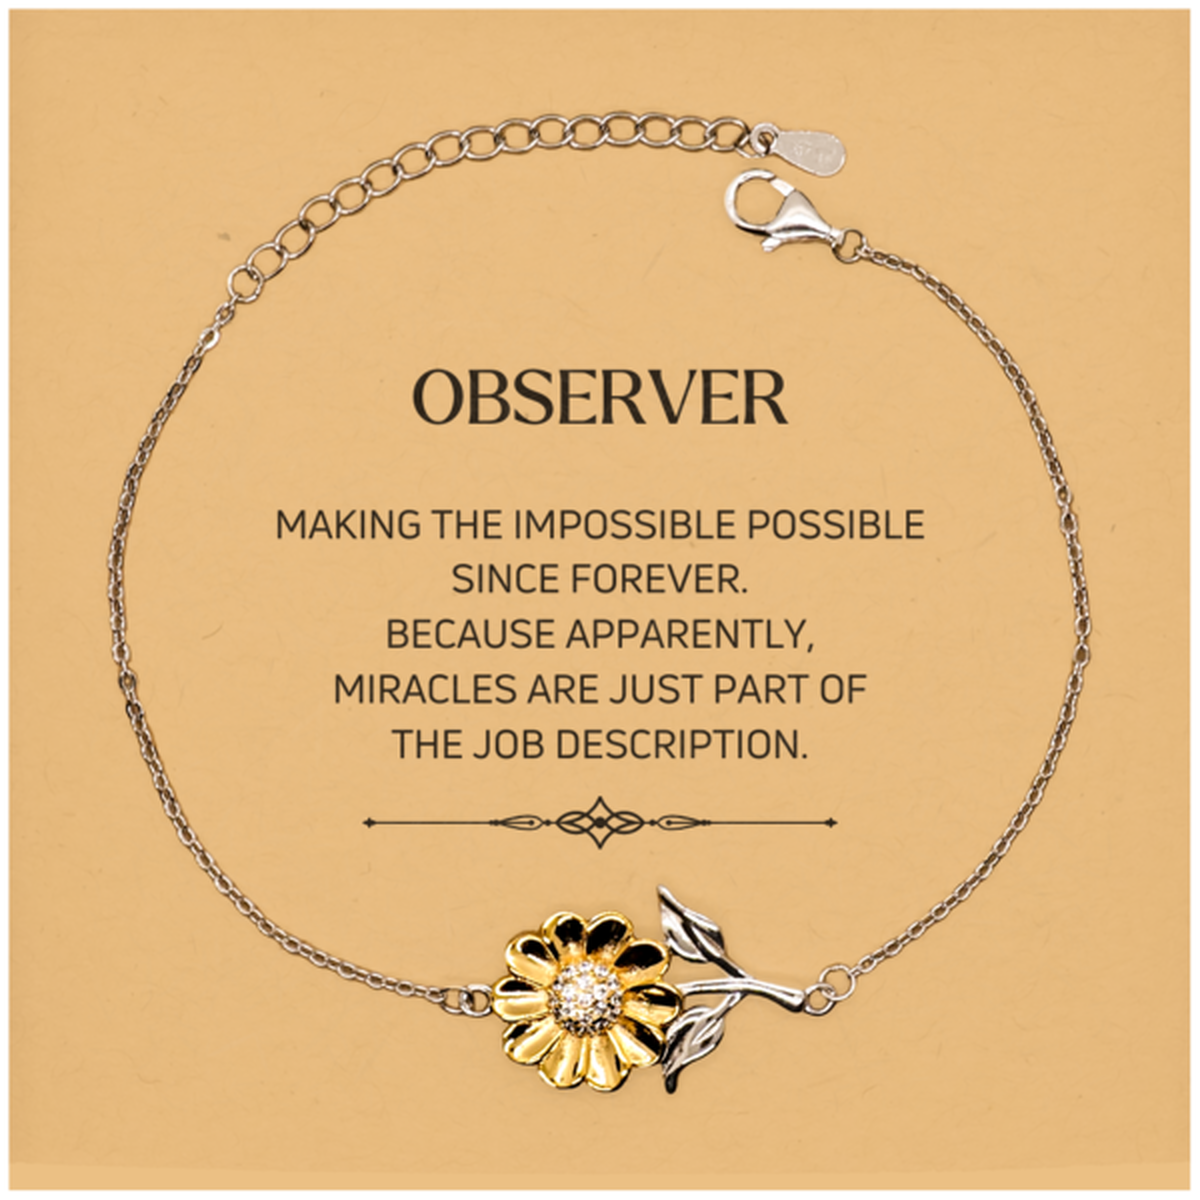 Funny Observer Gifts, Miracles are just part of the job description, Inspirational Birthday Christmas Sunflower Bracelet For Observer, Men, Women, Coworkers, Friends, Boss